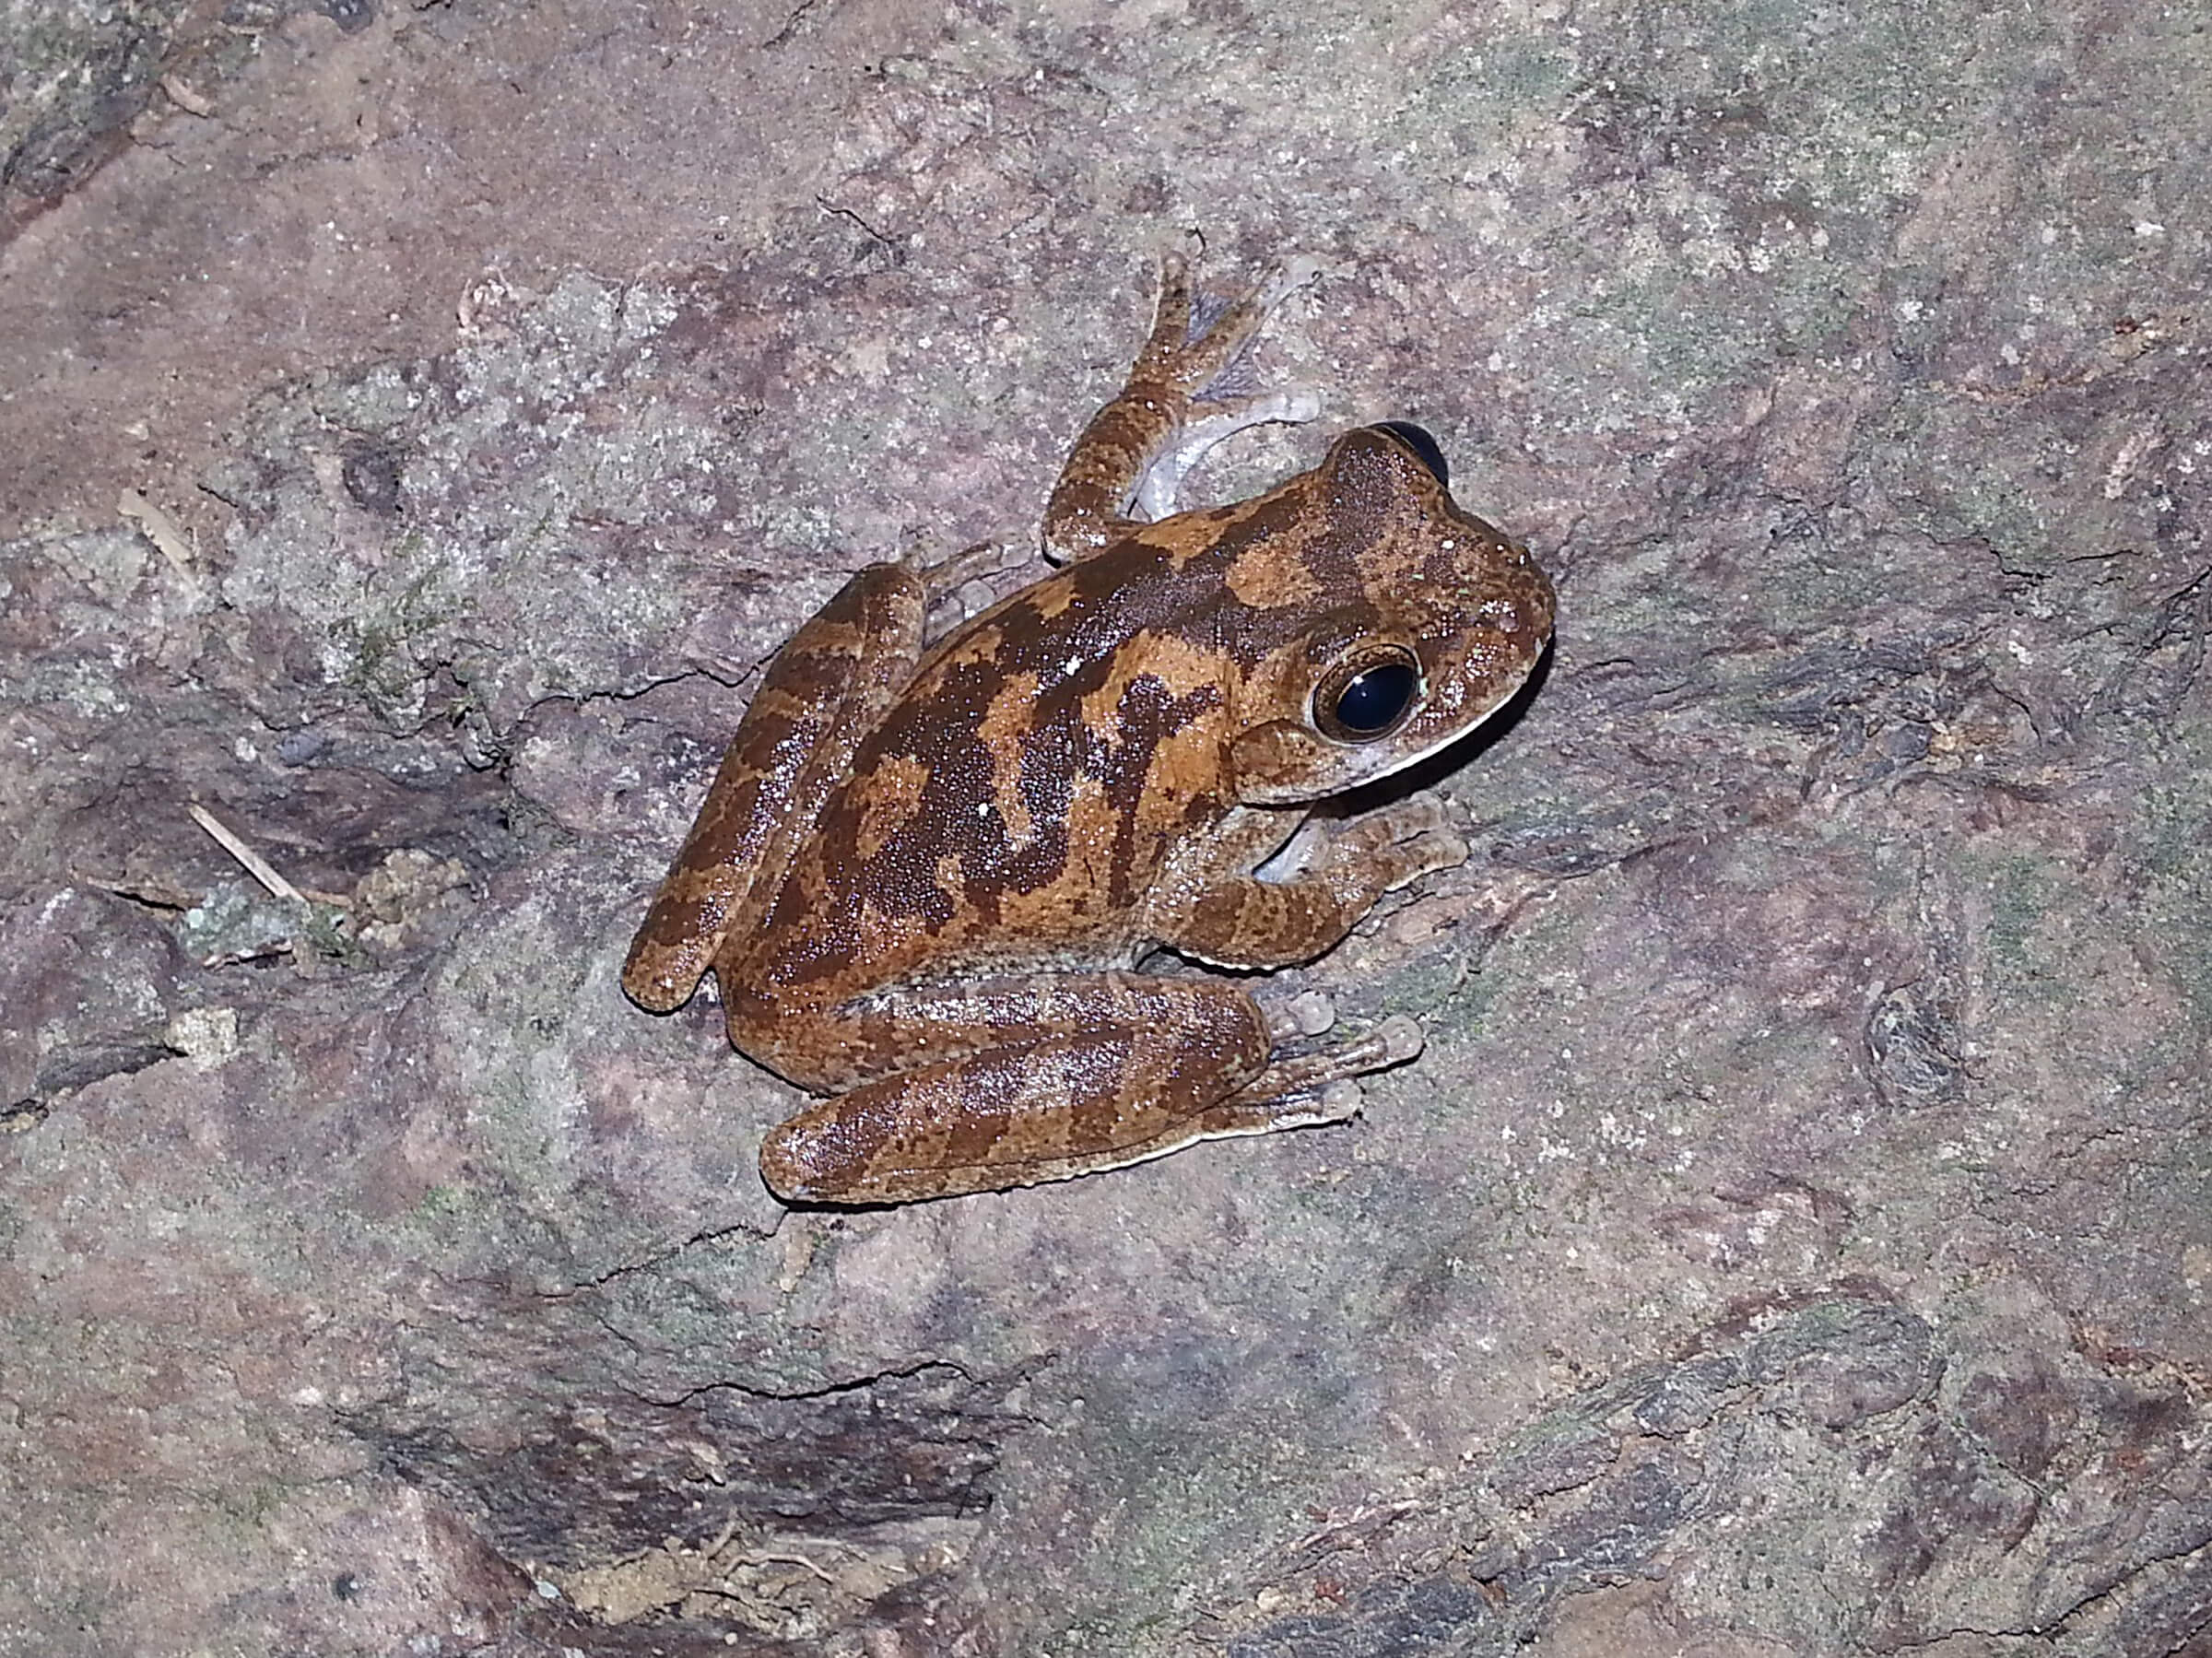 A brown treefrog clings on a rock